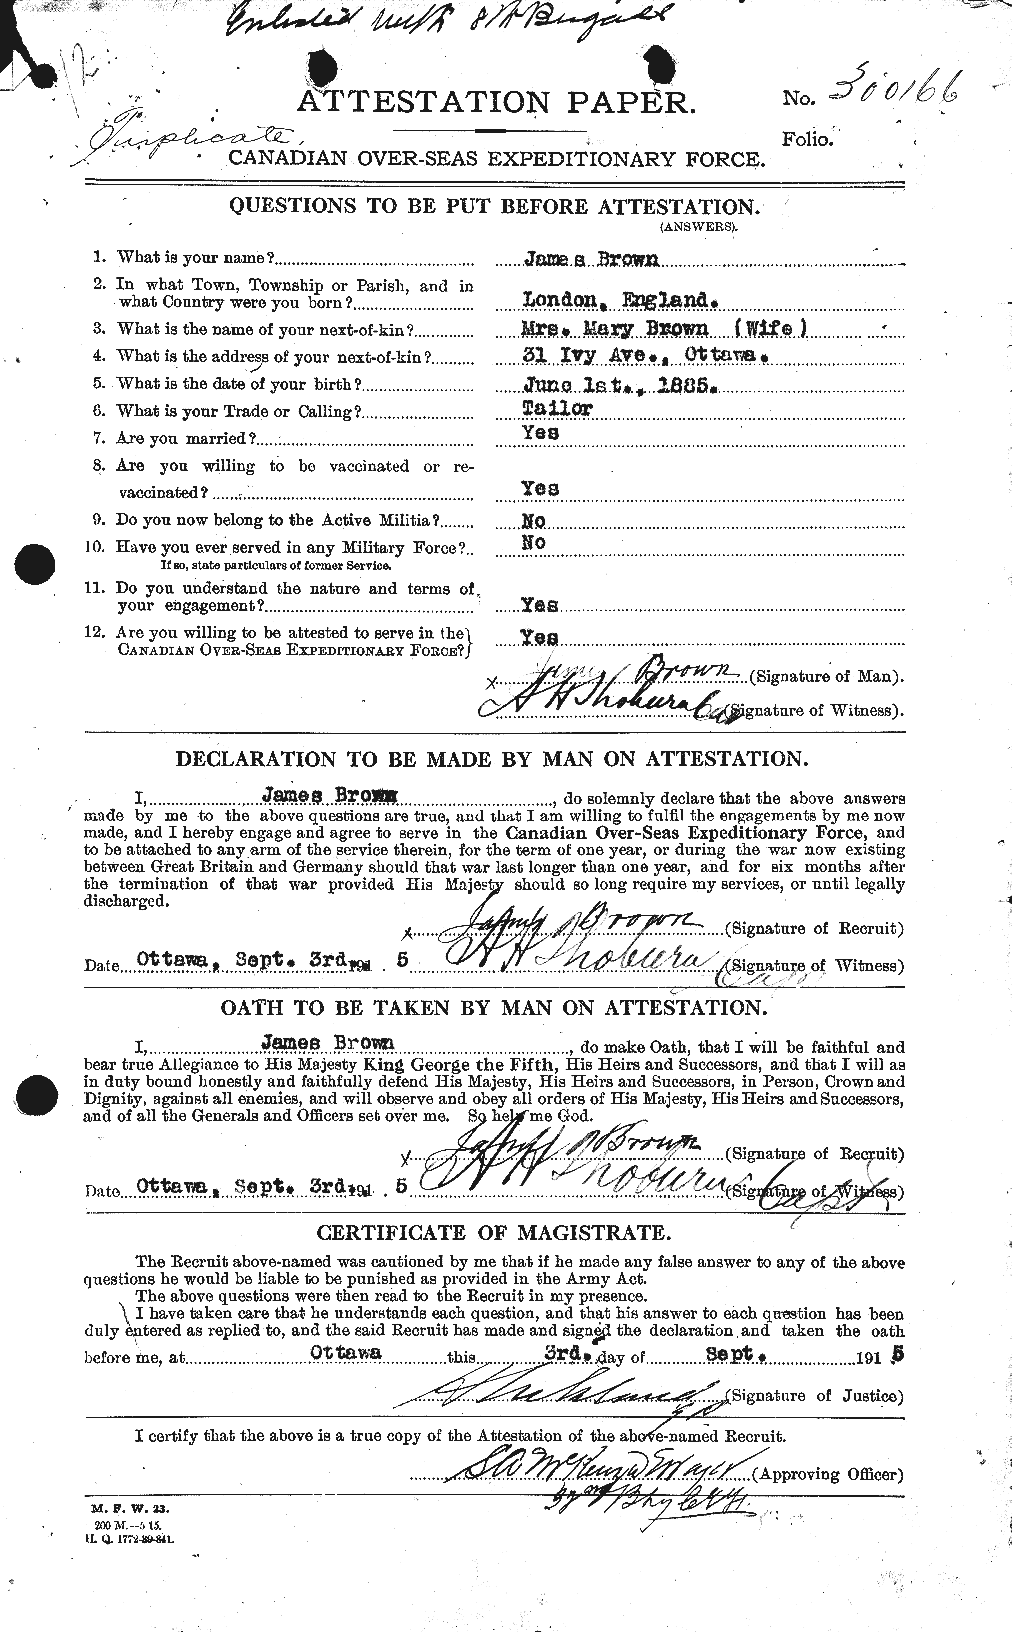 Personnel Records of the First World War - CEF 265709a